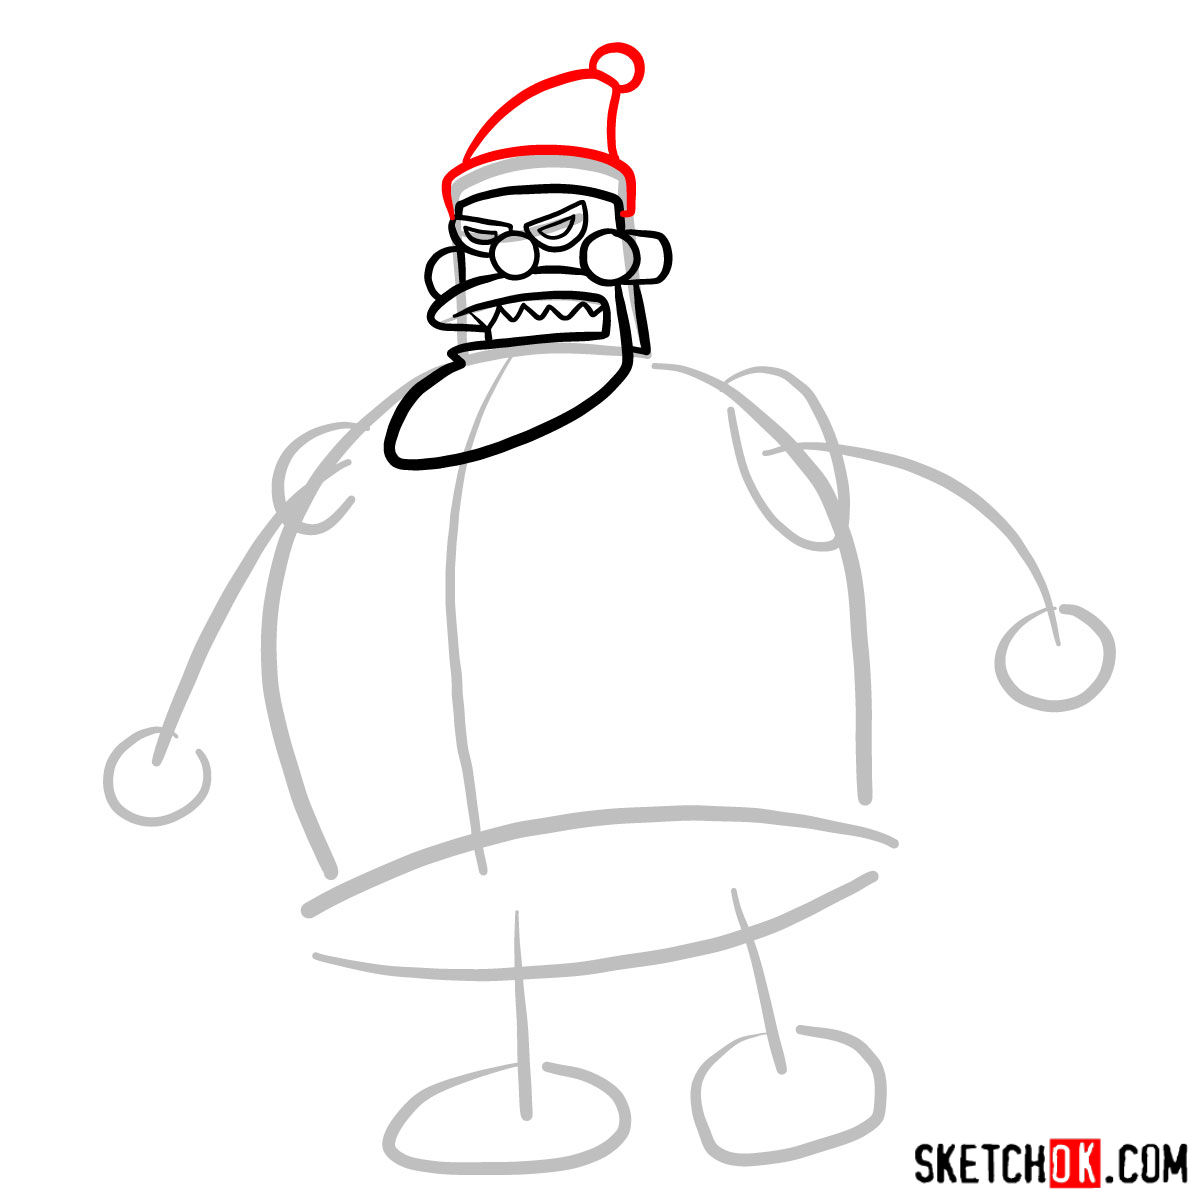 How to draw Robot Santa Claus - step 04